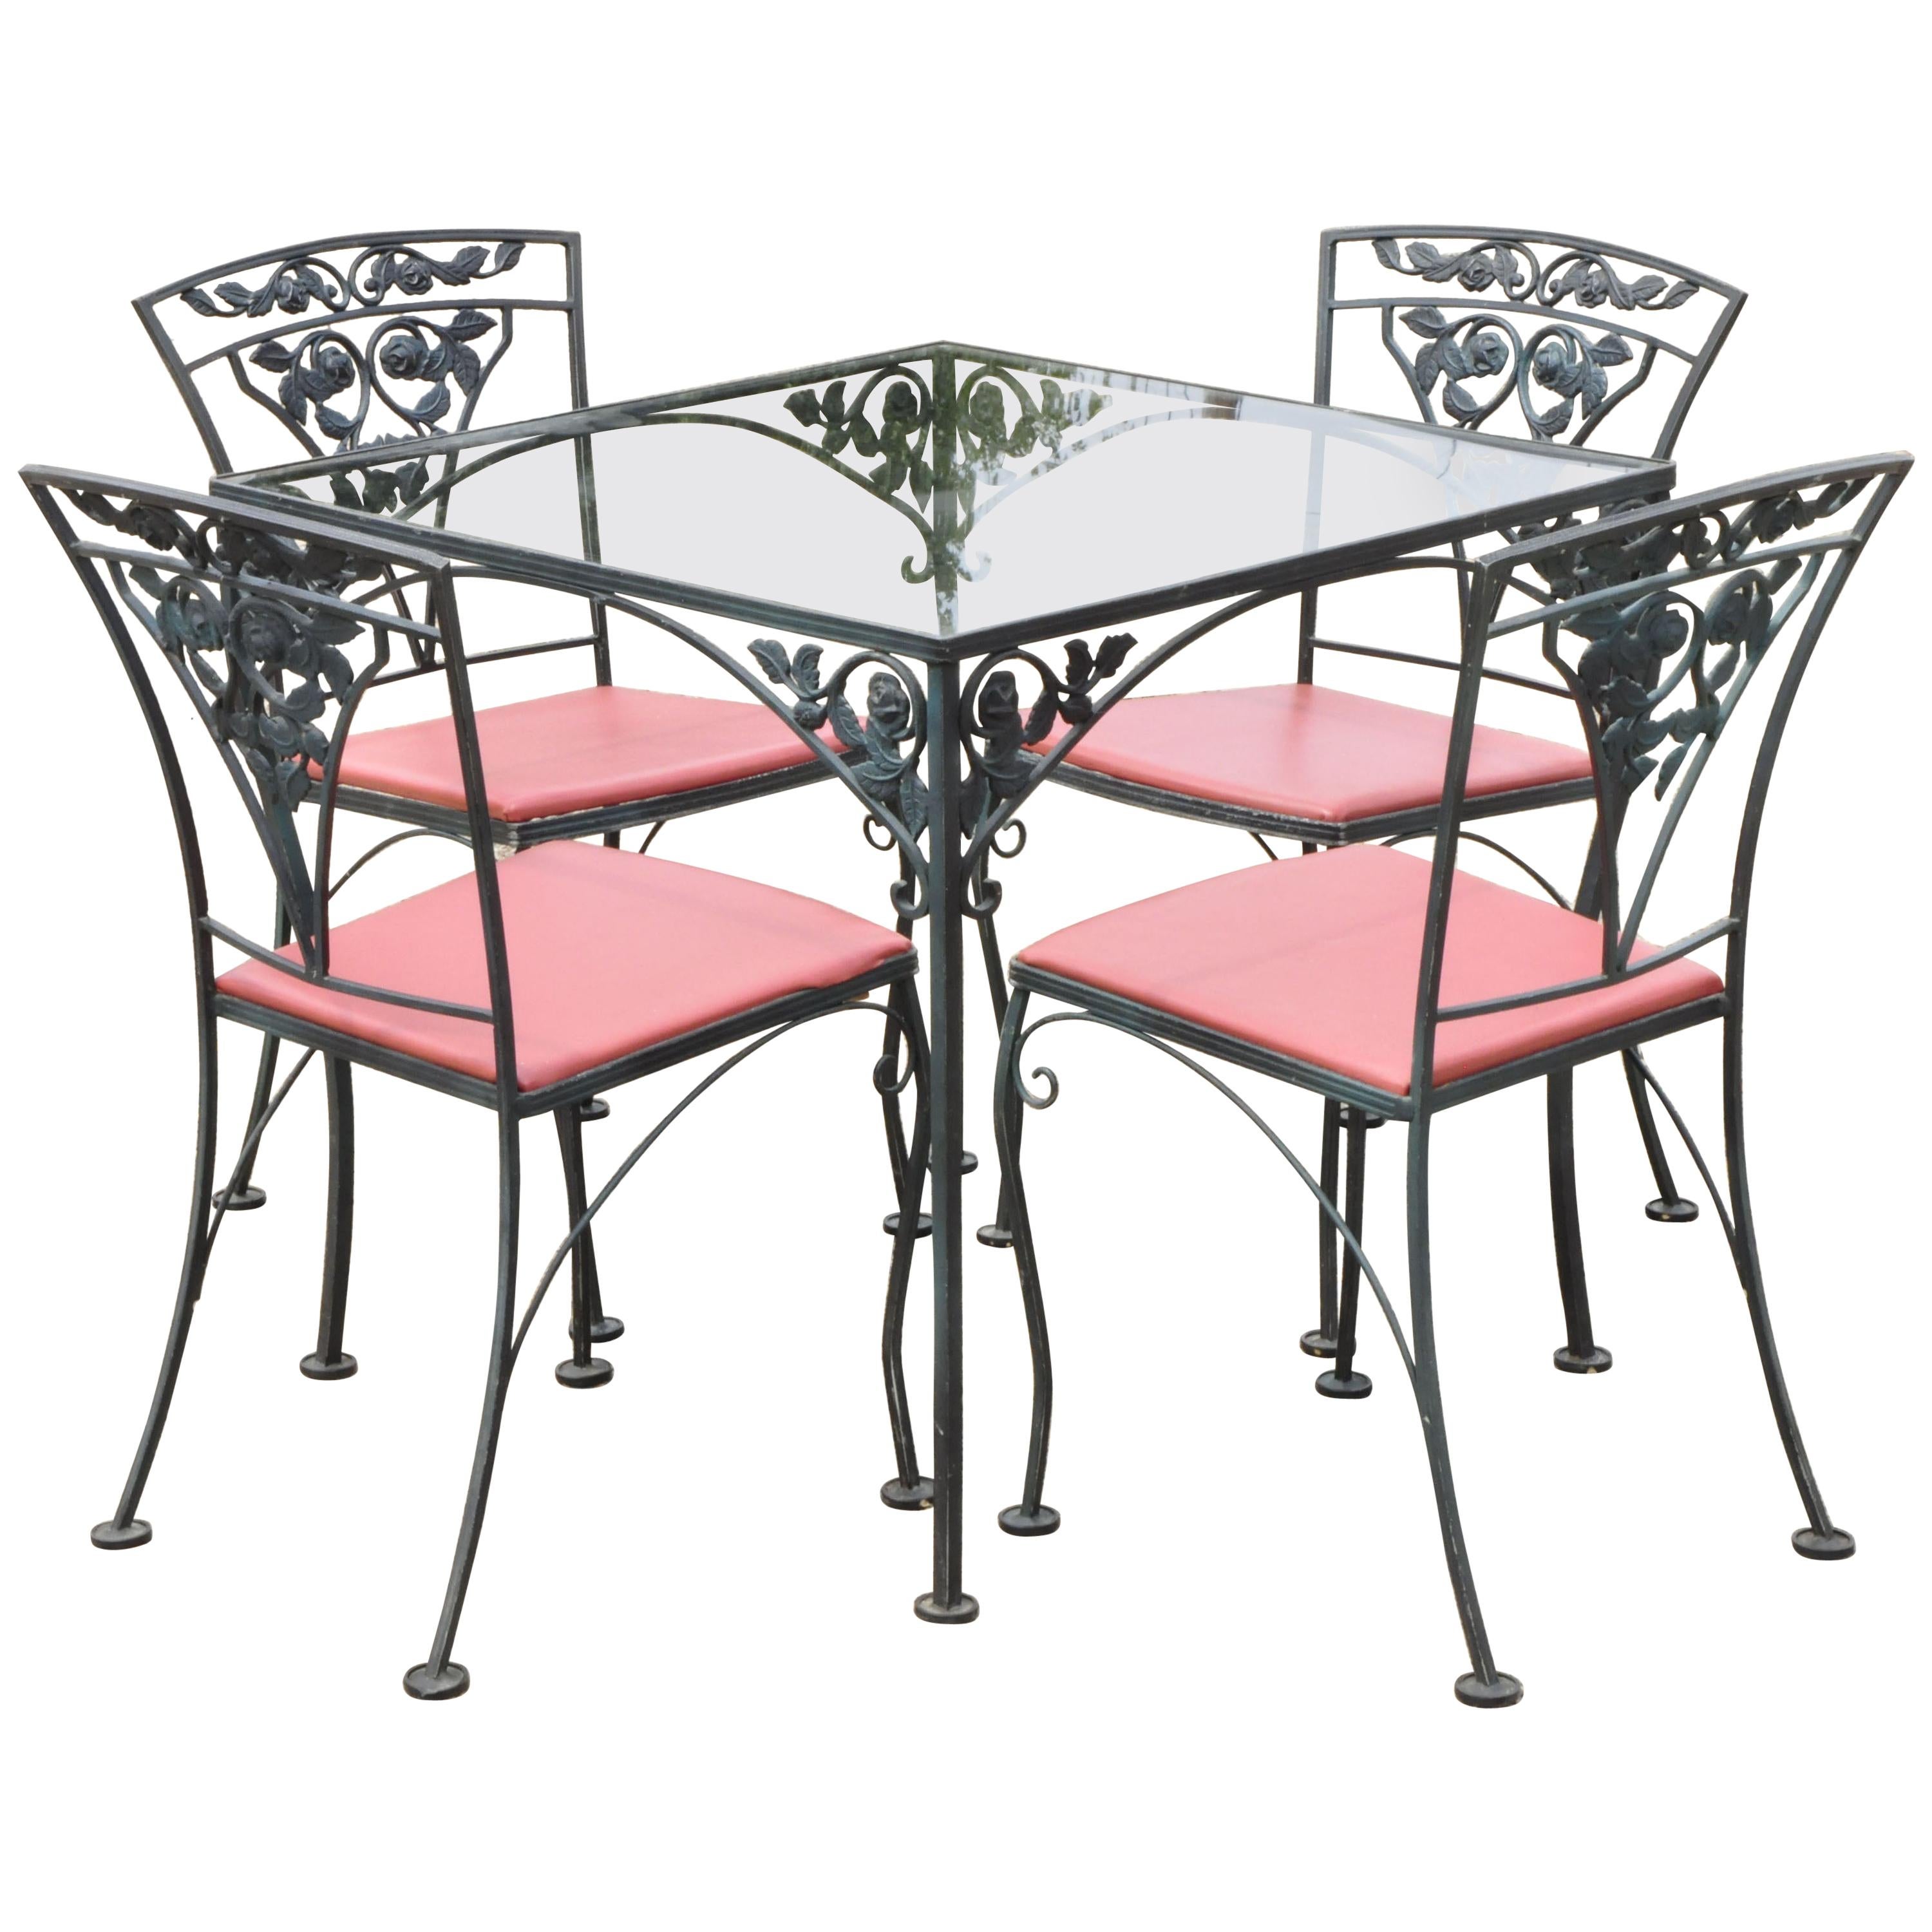 Woodard Chantilly Rose Green Garden Patio Dining Set of 4 Chairs & Square Table